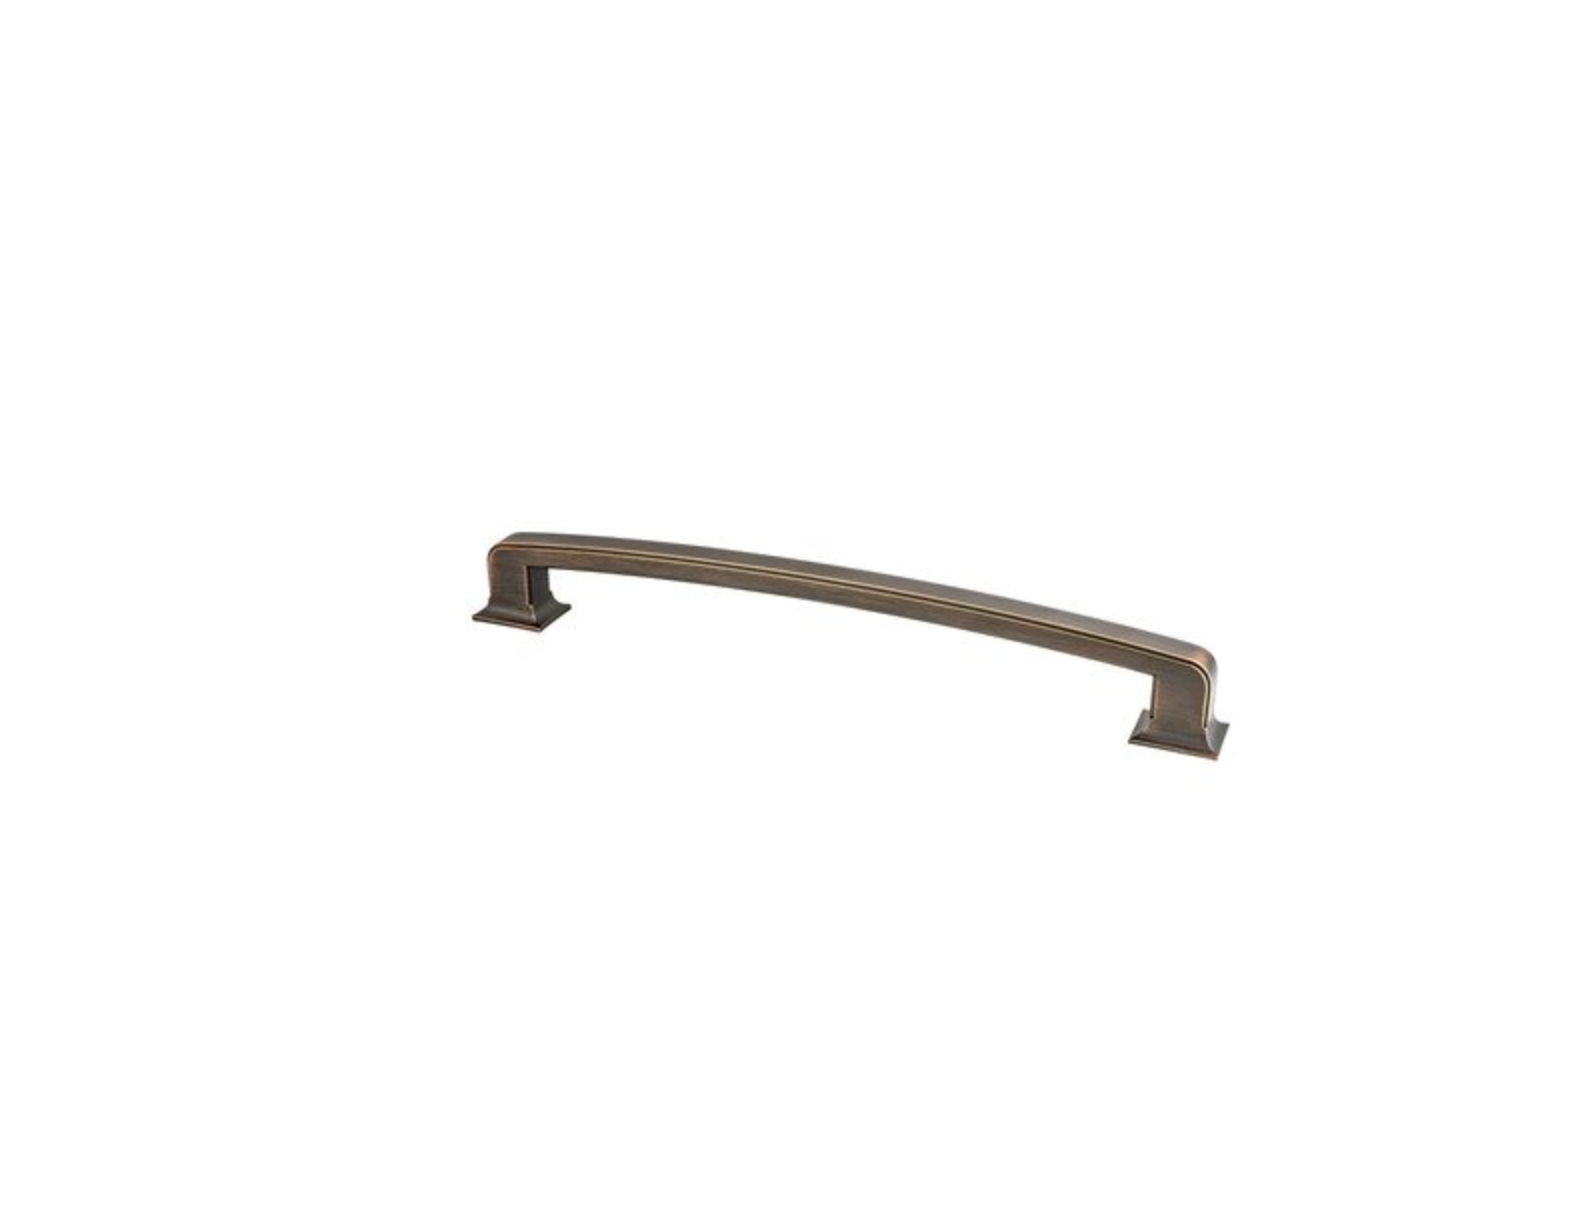 Dark Brushed Bronze "Liana" Drawer Pulls and Knobs for Cabinets and Furniture - Industry Hardware